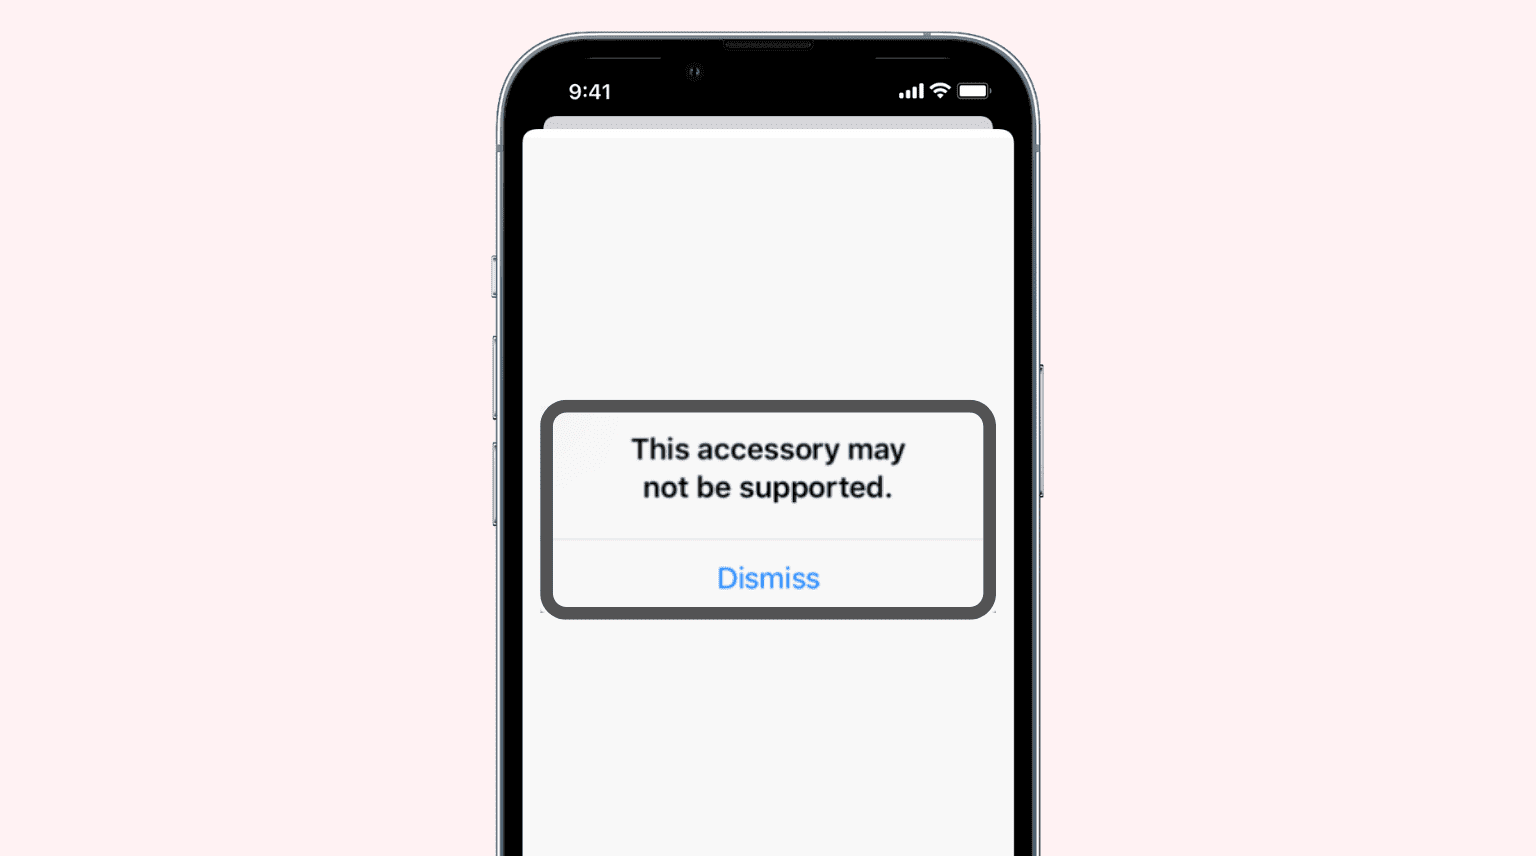 This accessory may not be supported alert on iPhone